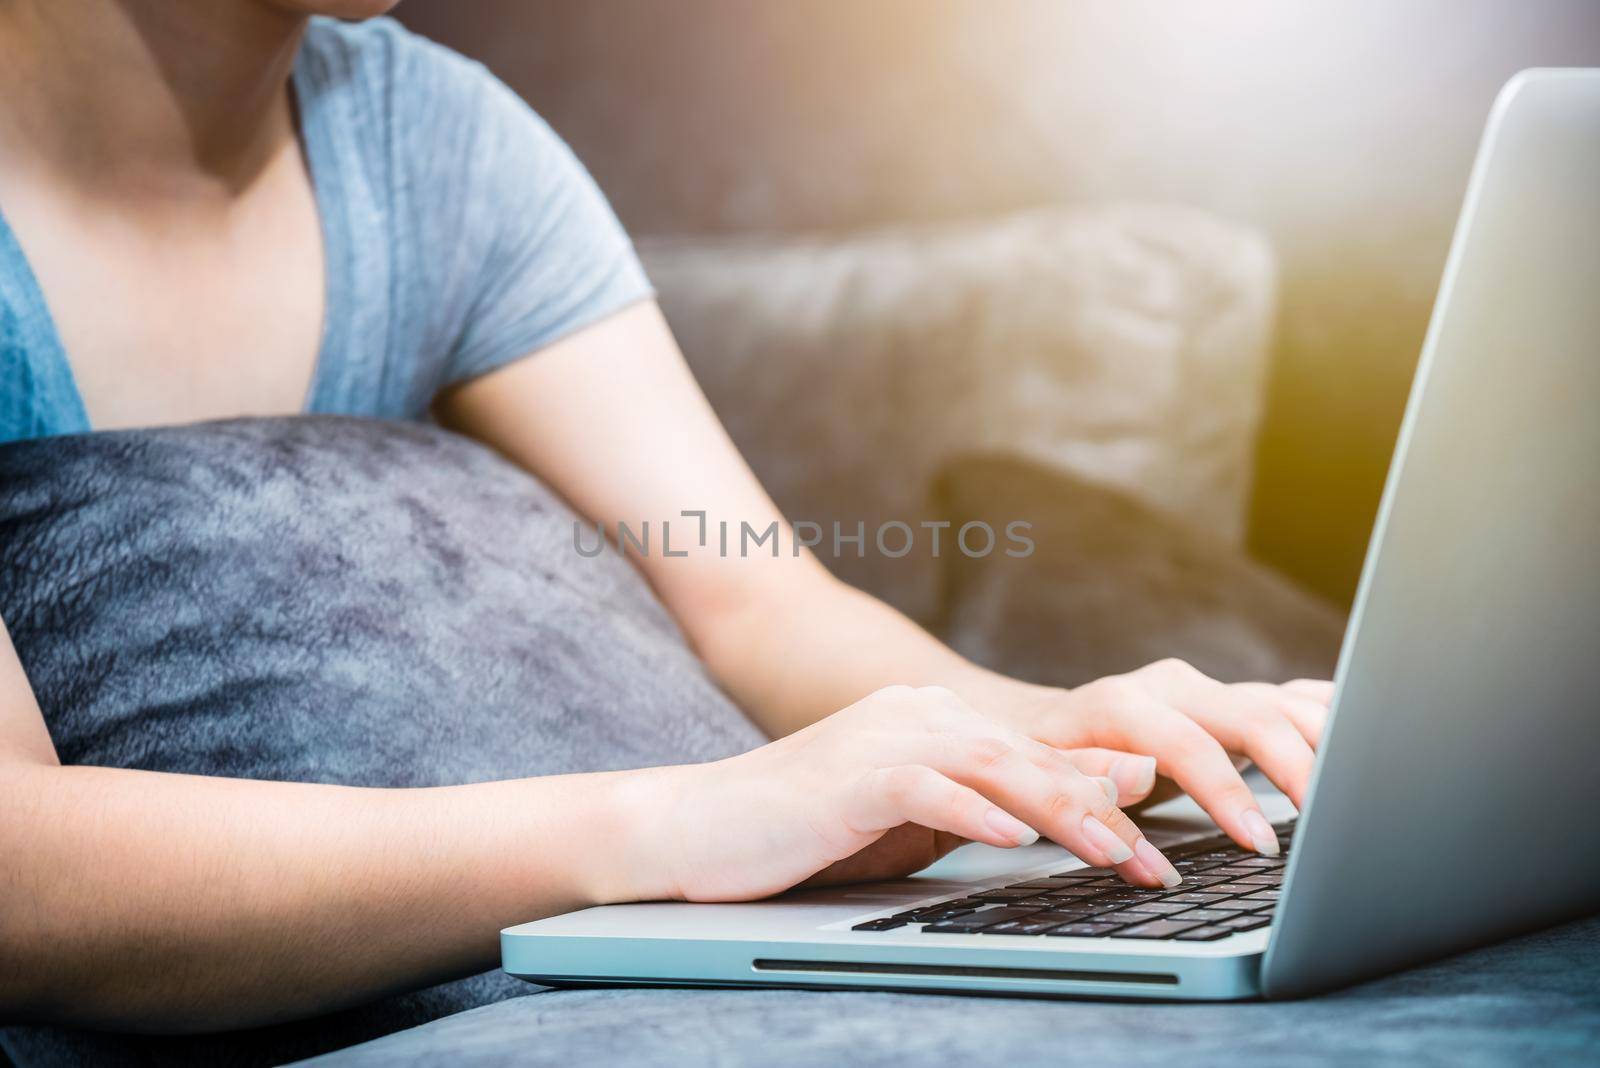 Closeup hand of woman on keyboard at laptop under the sunlight, Doing business online indoors, Working remotely, education, shopping, communicate long distances via computer and the internet from home